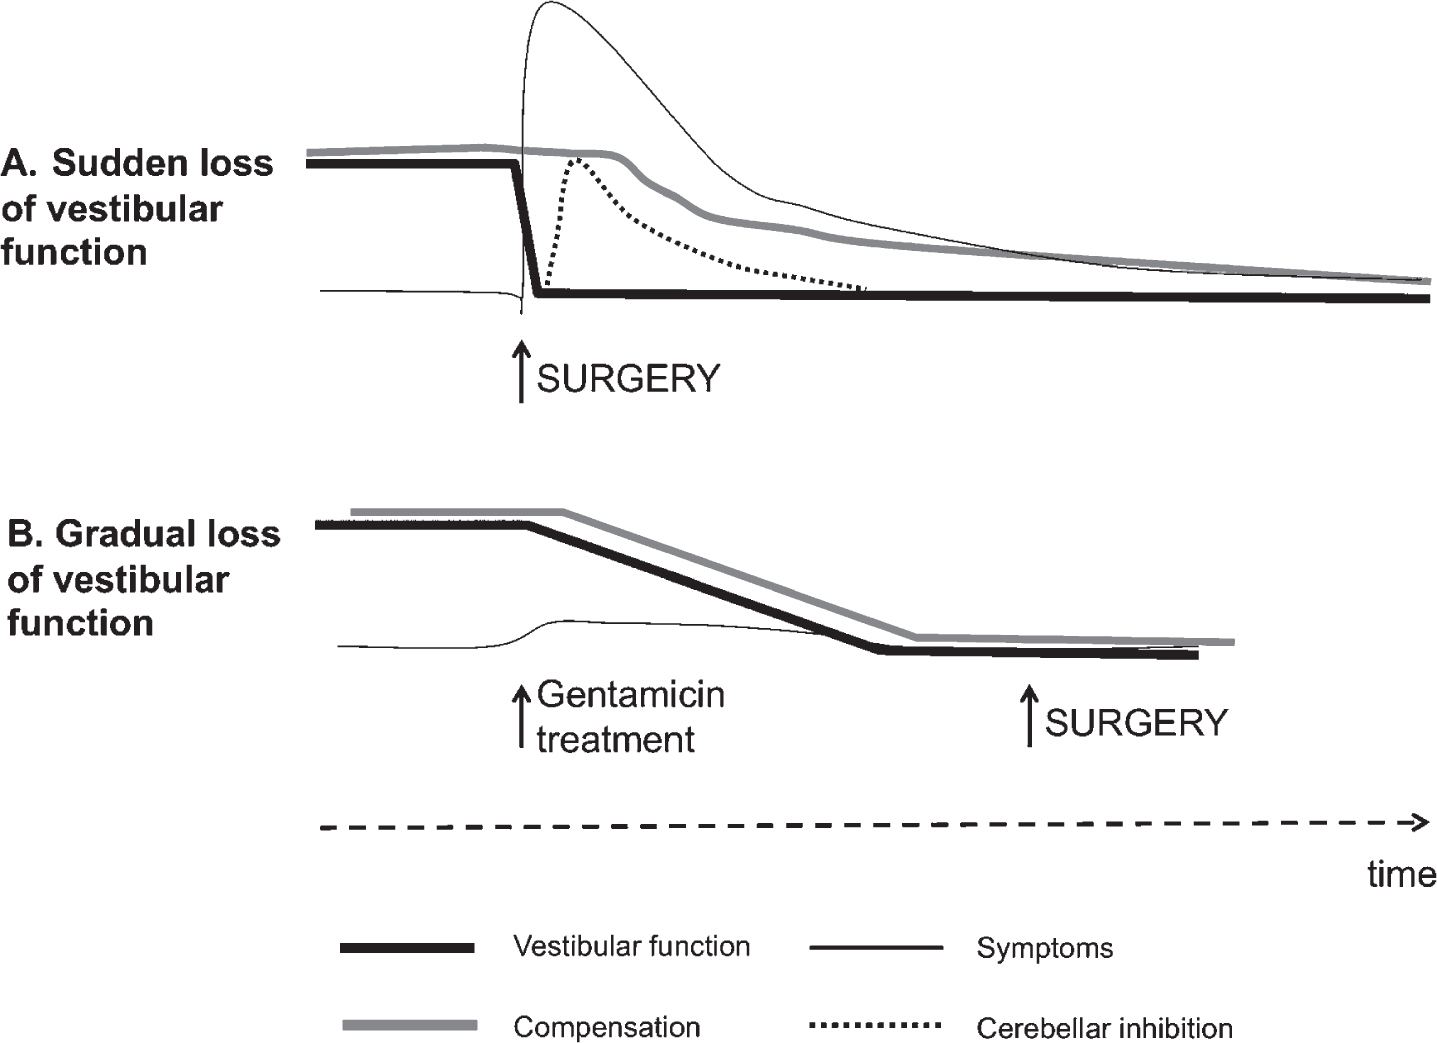 Theory behind the vestibular PREHAB protocol. In A, an abrupt deafferentation cause intense vestibular symptoms initially that gradually subsides as the cerebellar inhibition develops. Compensation becomes delayed as a consequence due to the inhibition as well as from the intensity of symptoms. In B. the vestibular function gradually attenuates with little or no symptoms allowing compensation to ensue unimpeded.